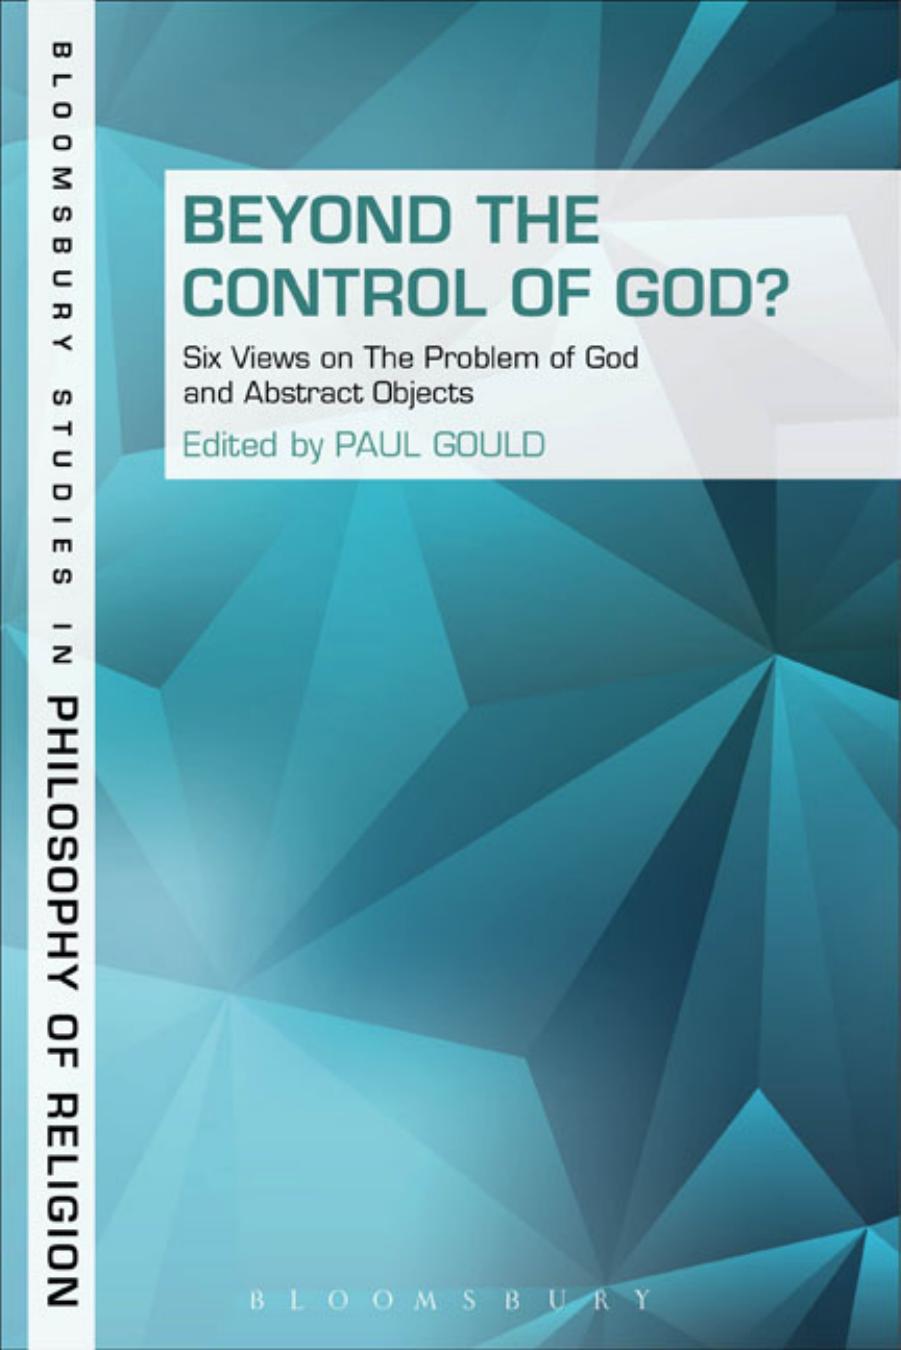 Beyond the Control of God?: Six Views on the Problem of God and Abstract Objects